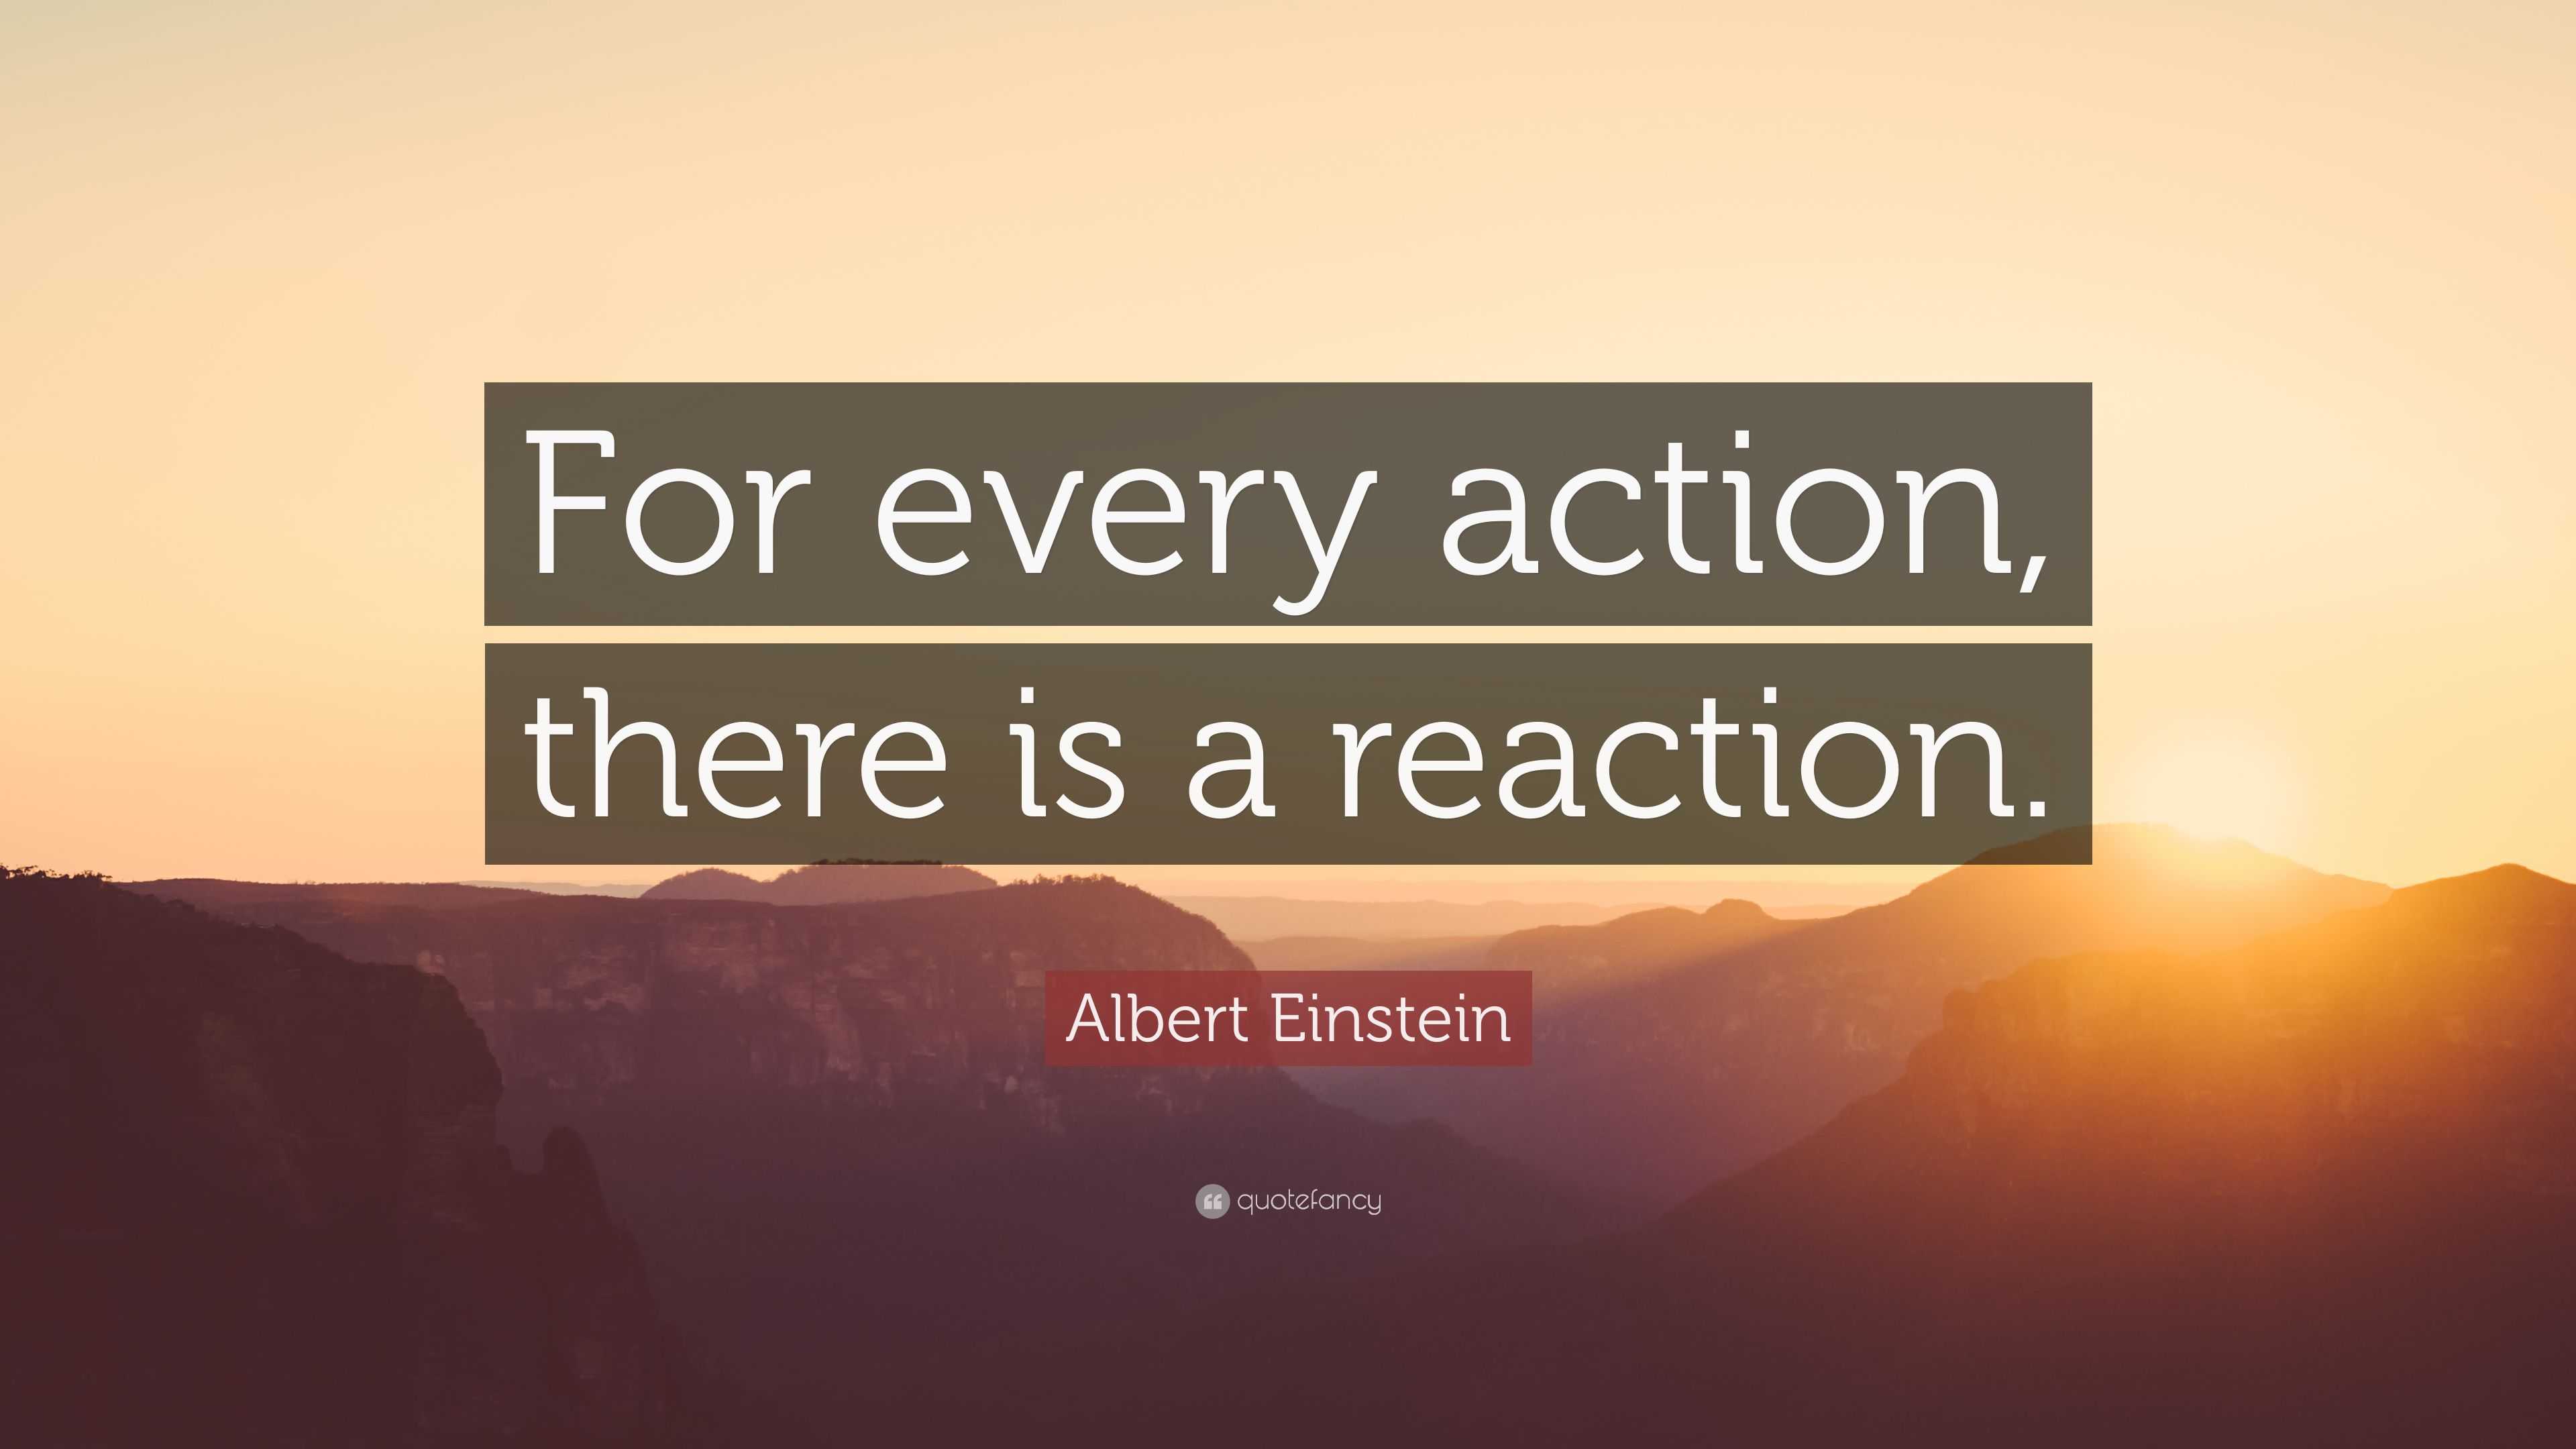 Albert Einstein Quote “For every action, there is a